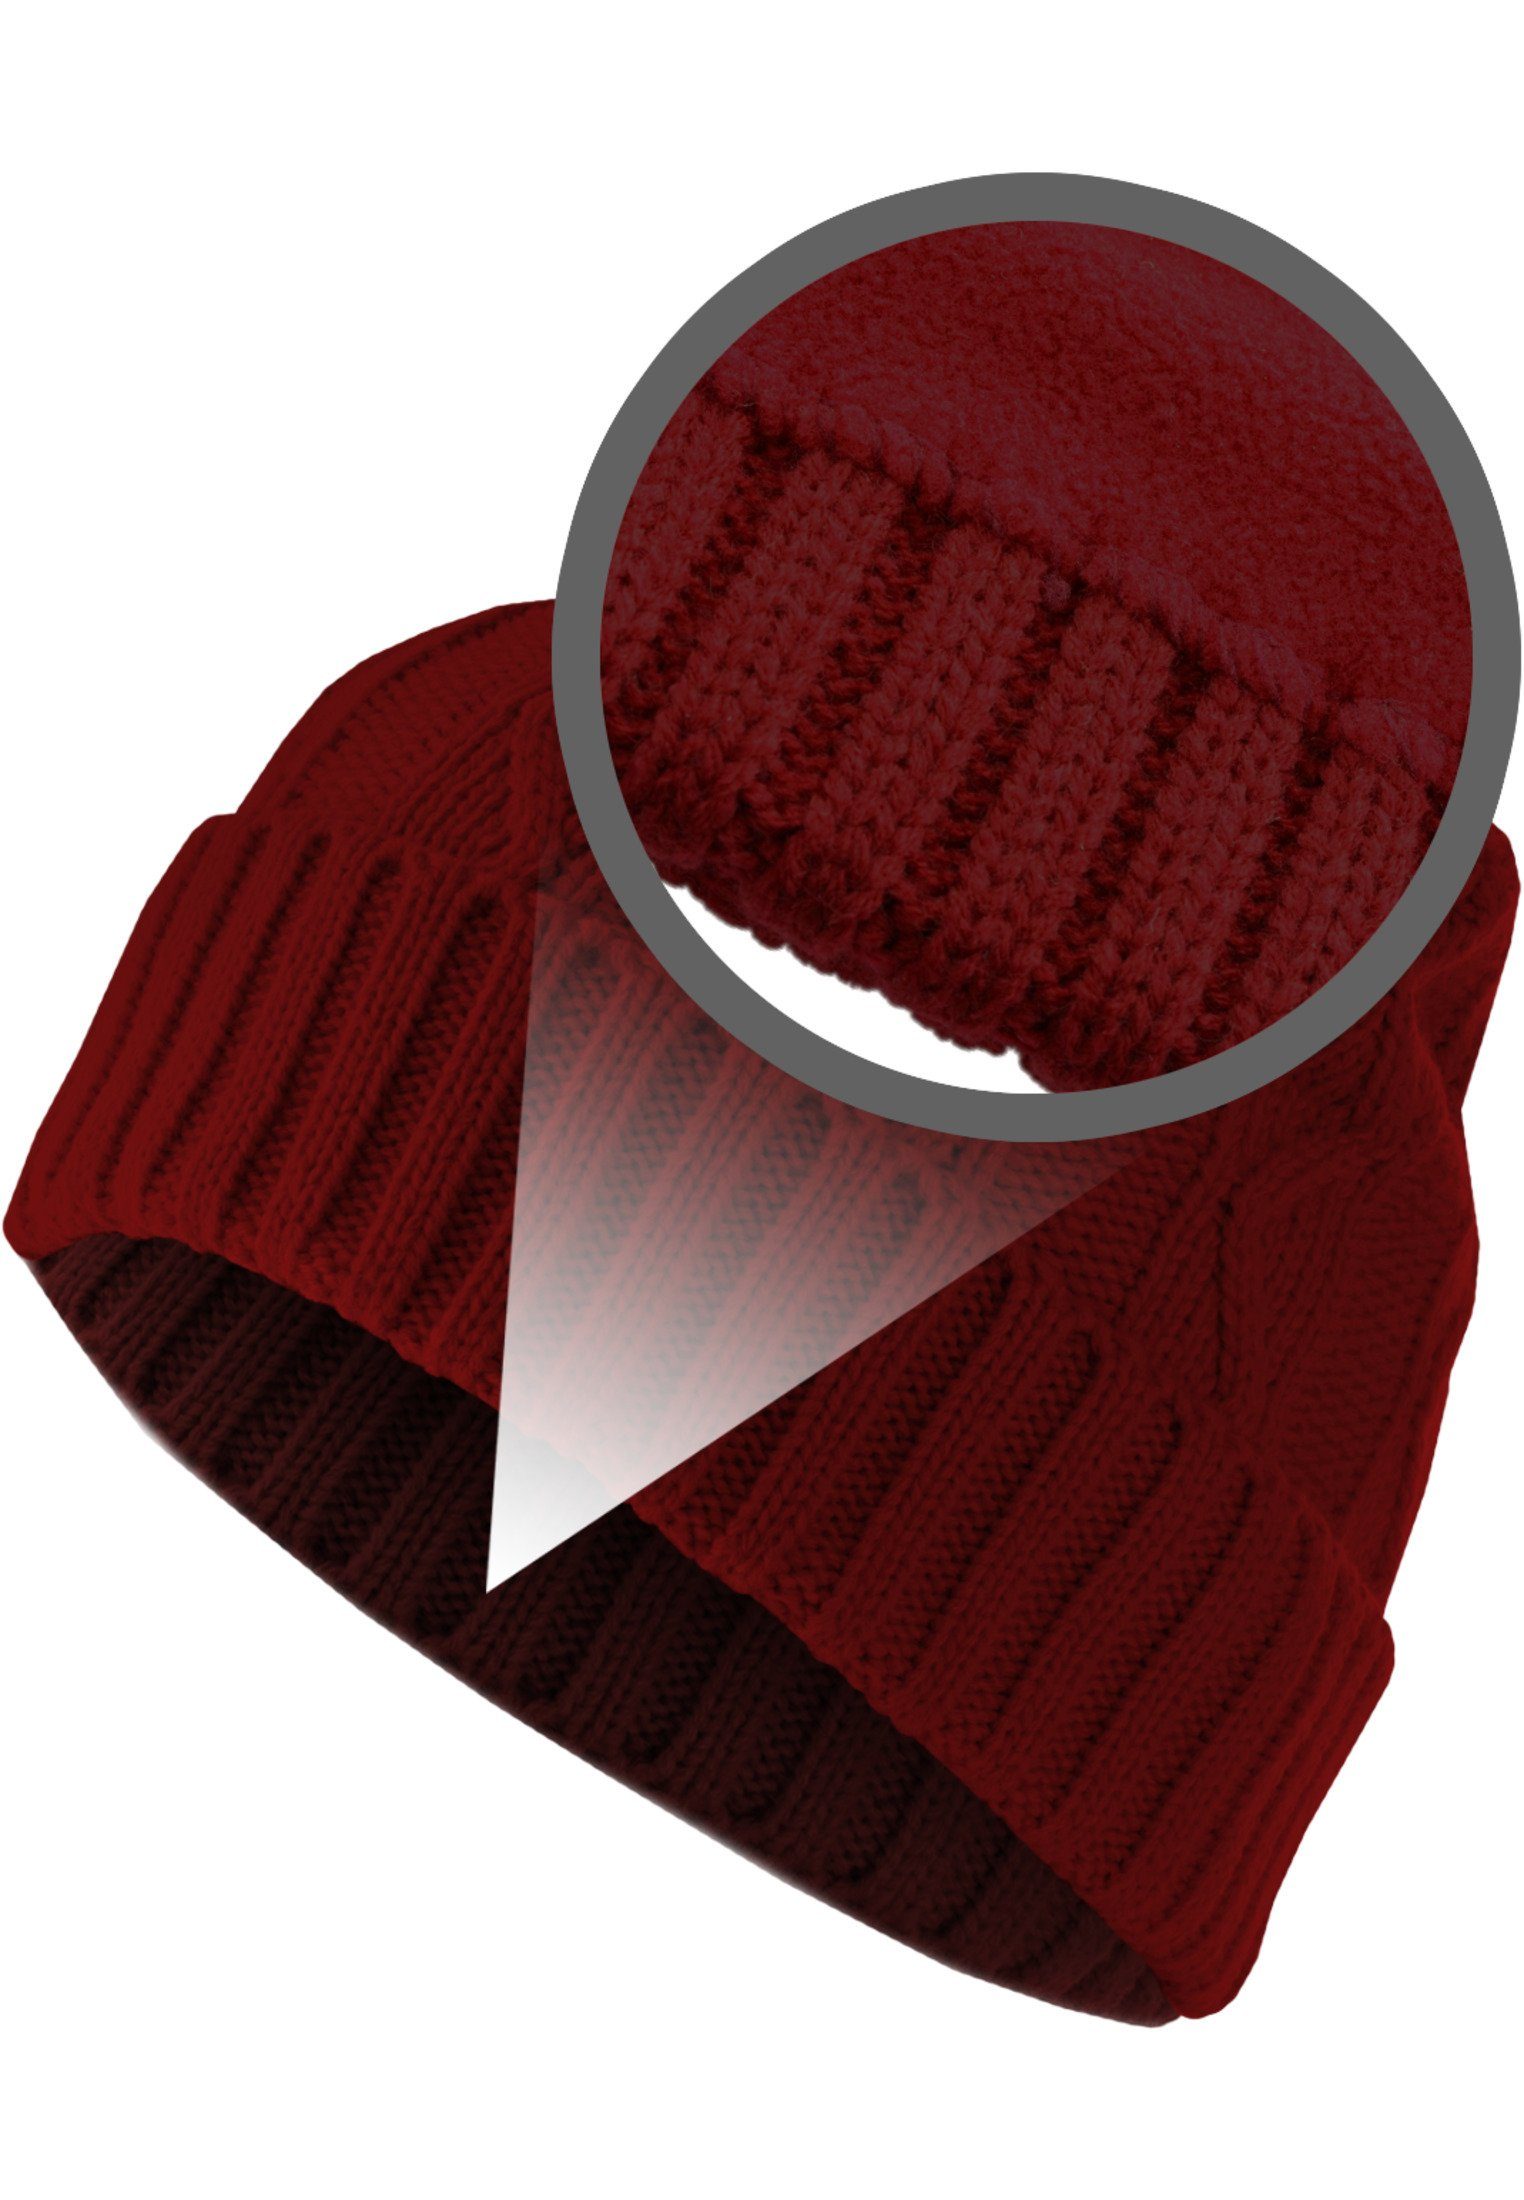 Accessoires Beanie Flap (1-St) Beanie MSTRDS Cable maroon